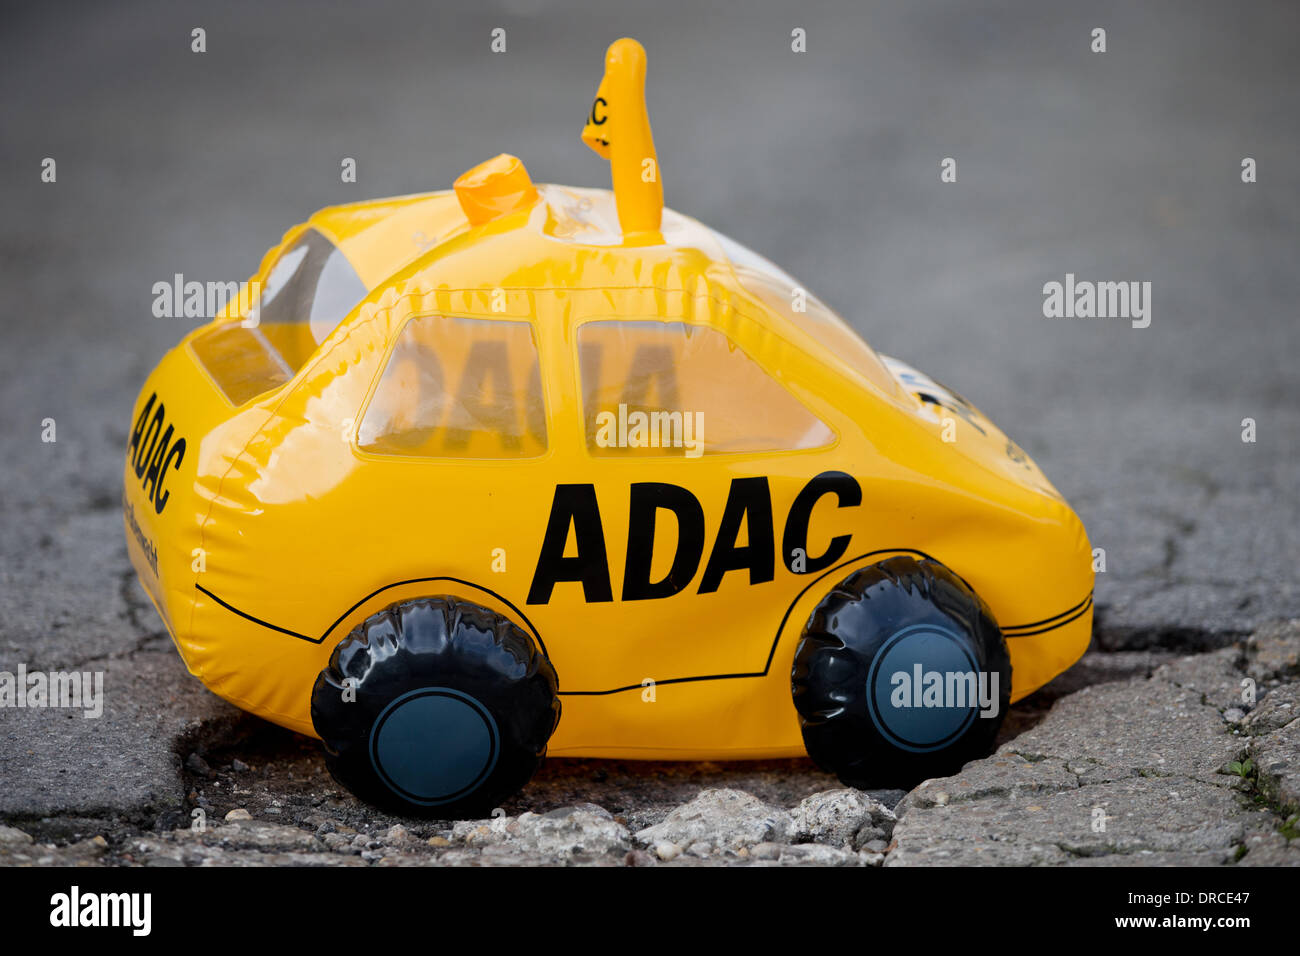 Solingen, Germany. 23rd Jan, 2014. ILLUSTRATION - An inflatable toy car with the logo of German automobile club ADAC sits in a pothole in Solingen, Germany, 23 January 2014. The tax payments to the ADAC are now coming under scrutiny after the manipulated figures in the ADAC election for Germany's favorite car. Photo: ROLF VENNENBERND/dpa/Alamy Live News Stock Photo